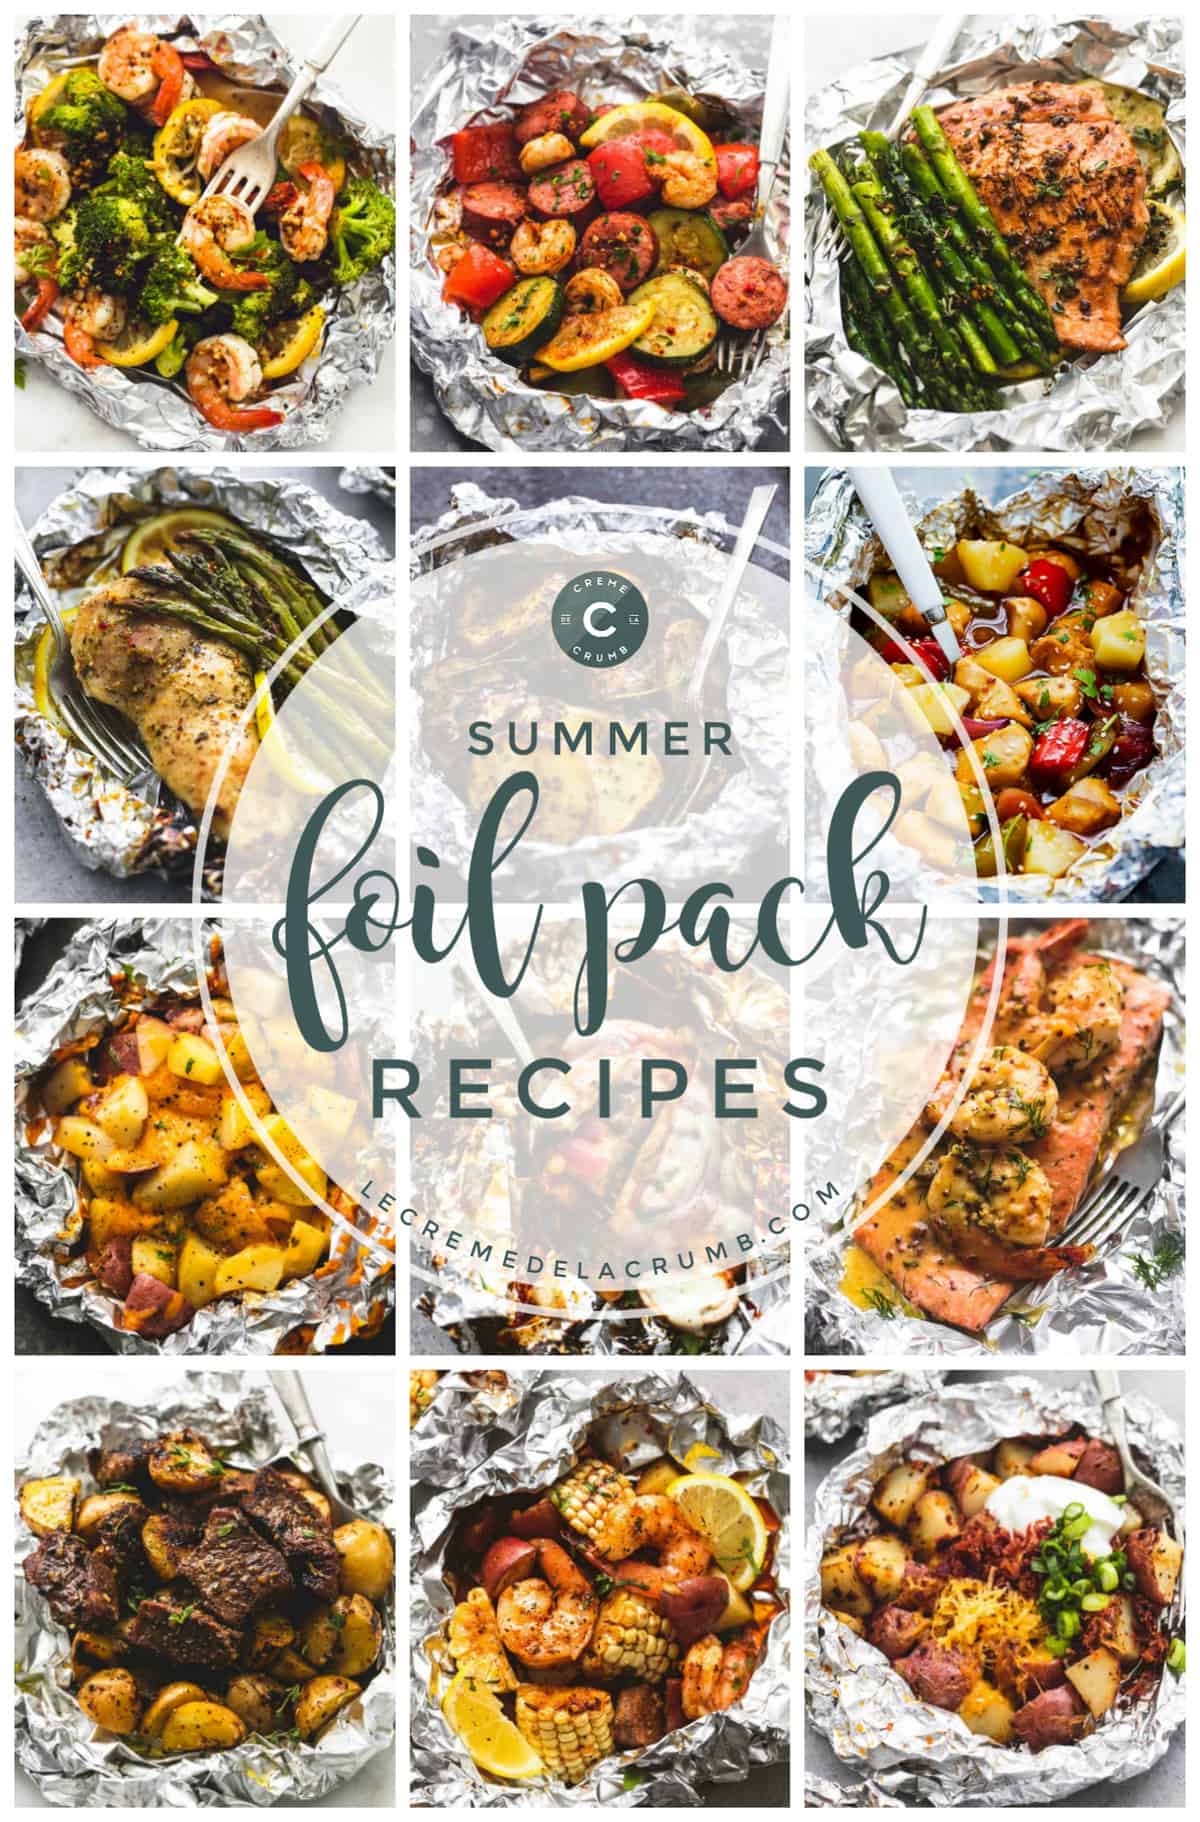 image of the cover of "summer foil pack Recipes" cookbook.